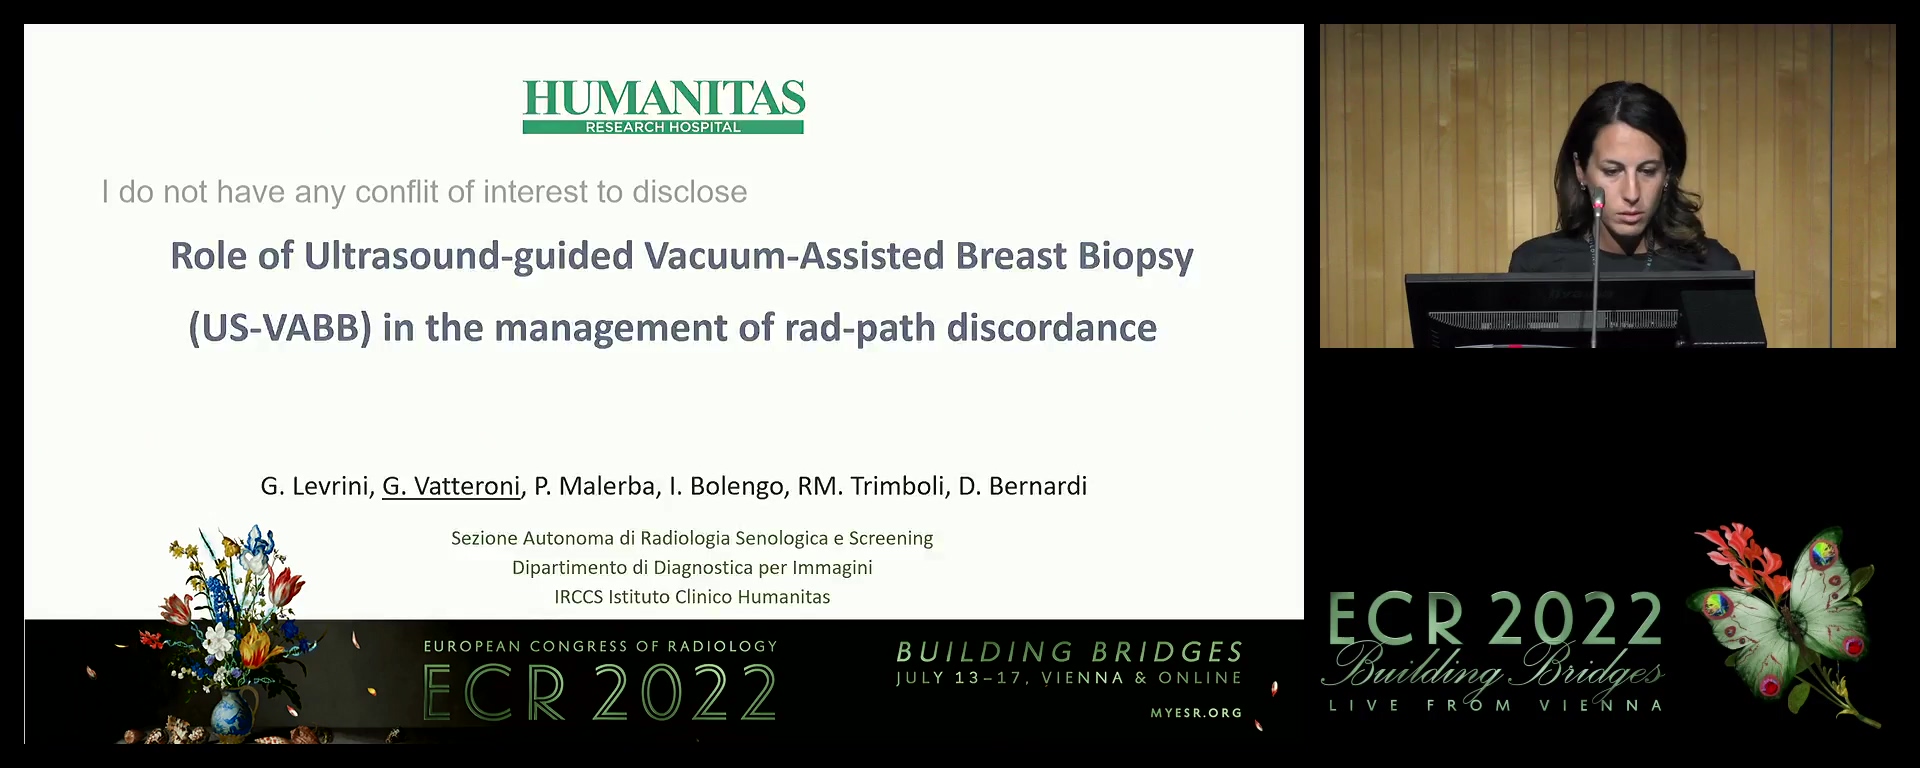 Role of ultrasound-guided vacuum-assisted breast biopsy (US-VABB) in the management of rad-path discordance